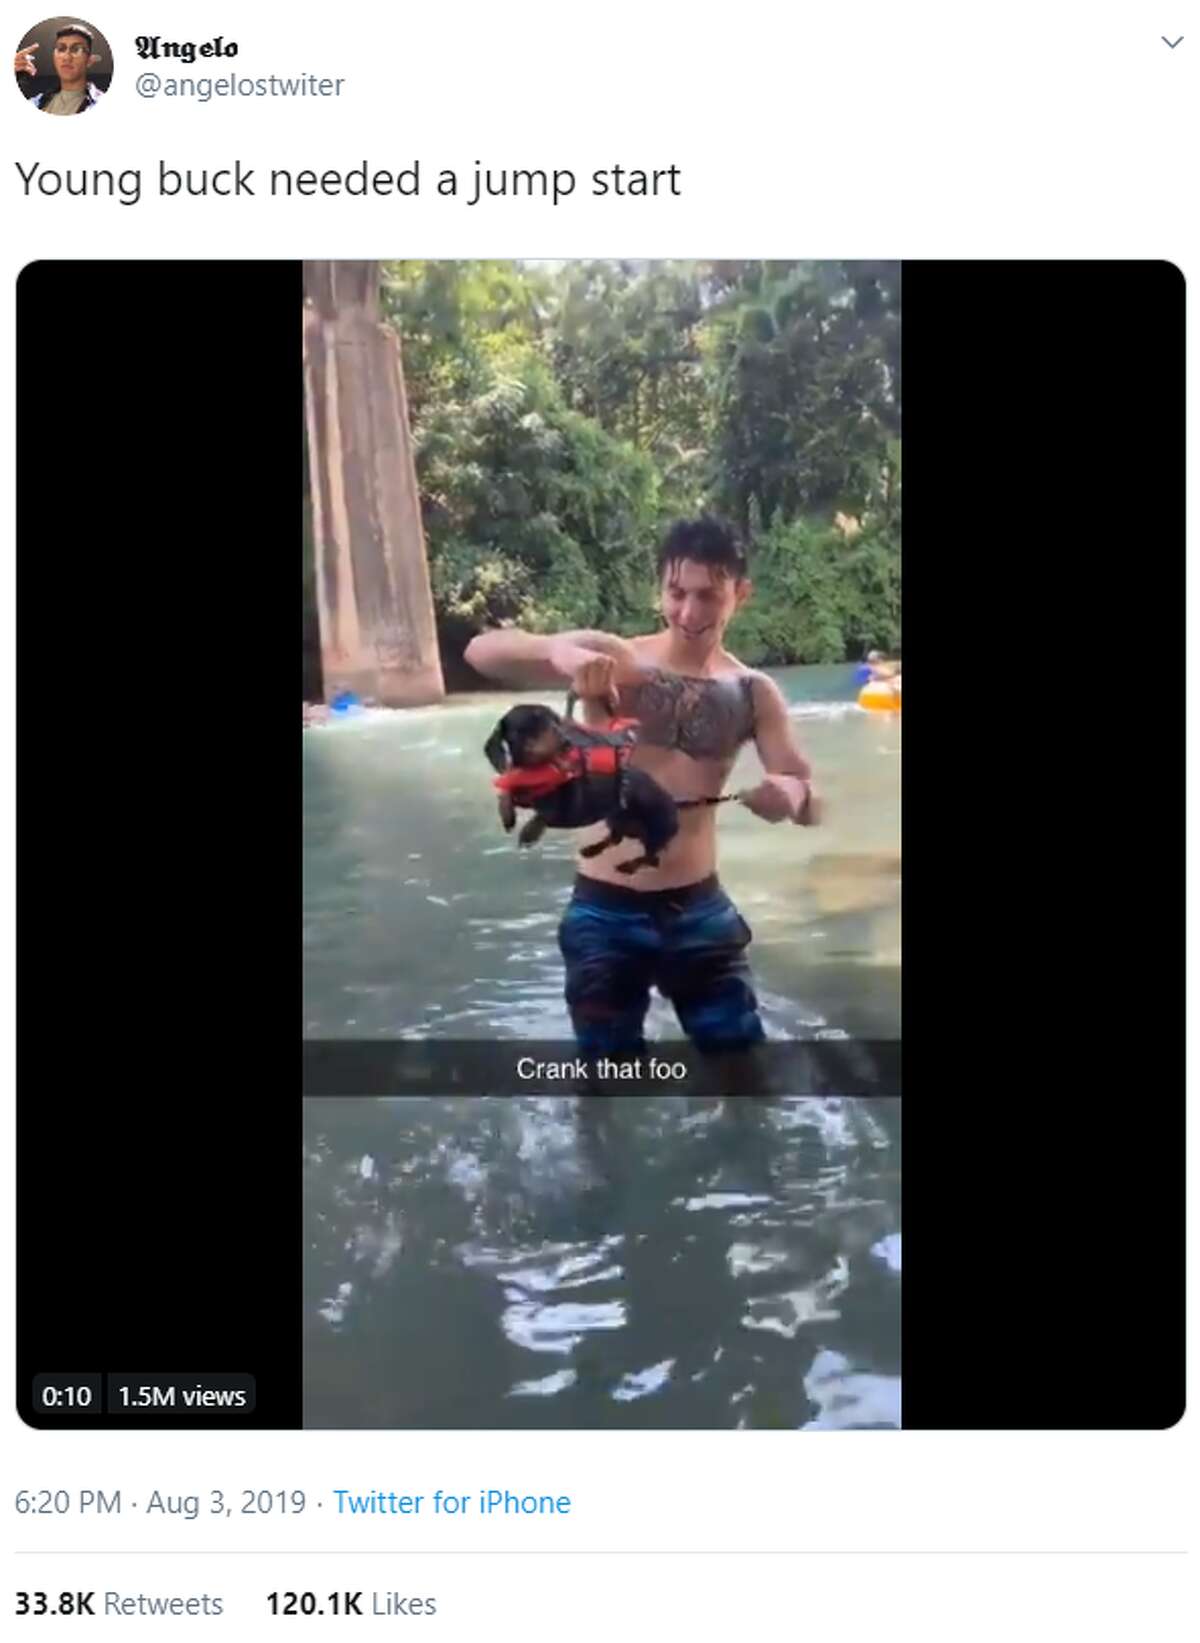 A San Antonio dog on the Comal River got a 'jump start' In the viral video, Richard Wallace holds his dog above the water by the handle on his life vest. As Wallace playfully turns Ollie's tail like a windup toy, the dog's little legs start peddling and he takes off into the water. Watch the "jump start" here.